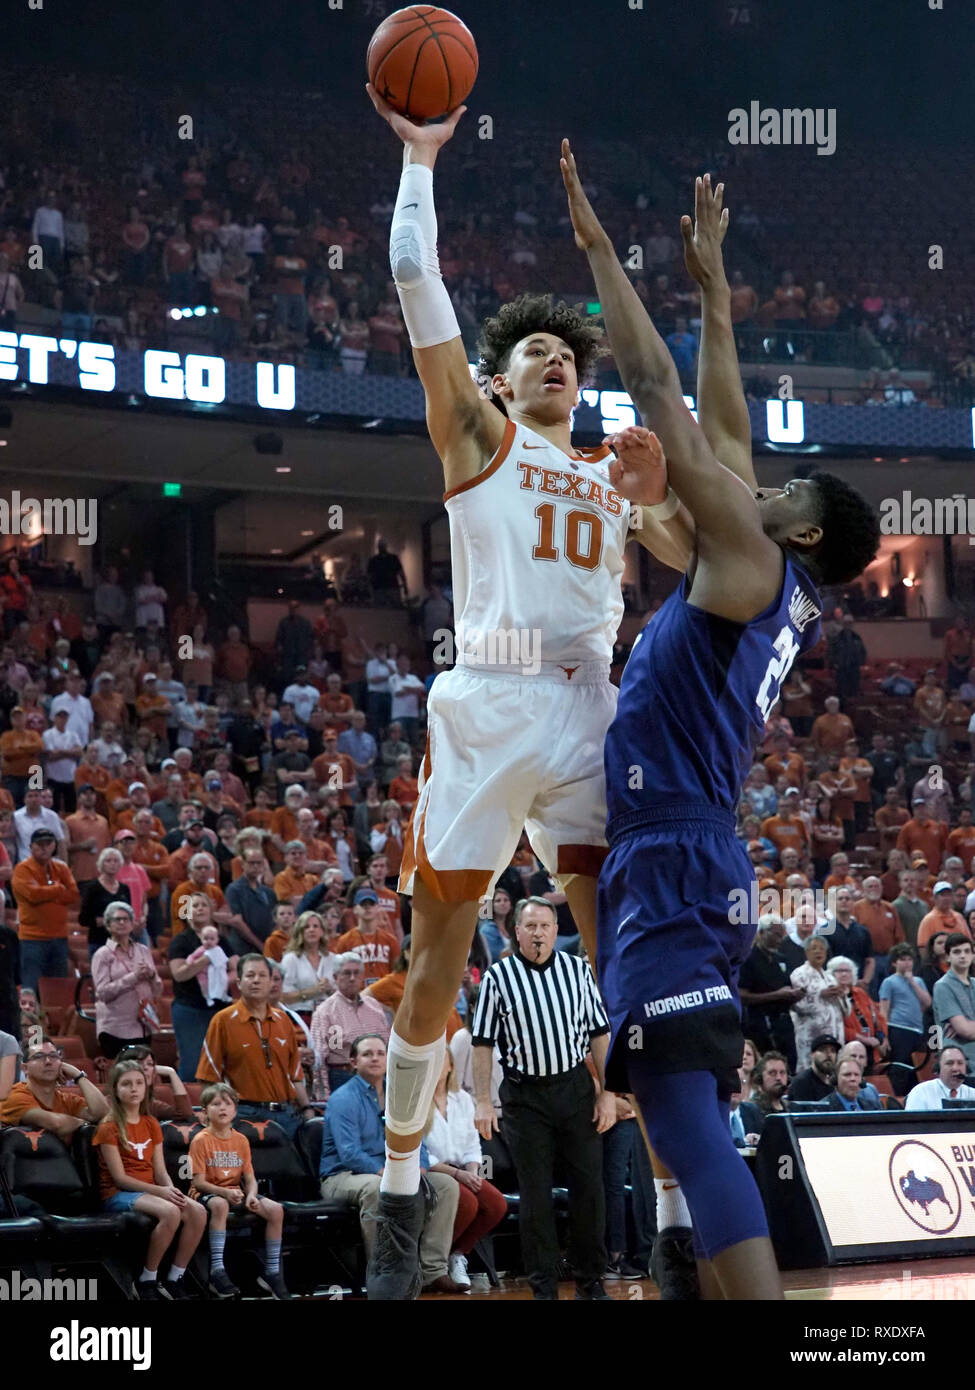 March 9, 2019. Jaxson Hayes #10 of the Texas Longhorns in action vs the TCU Horned Frogs at the Frank Erwin Center in Austin Texas. TCU beats Texas 69-54.Robert Backman/Cal Sport Media. Stock Photo